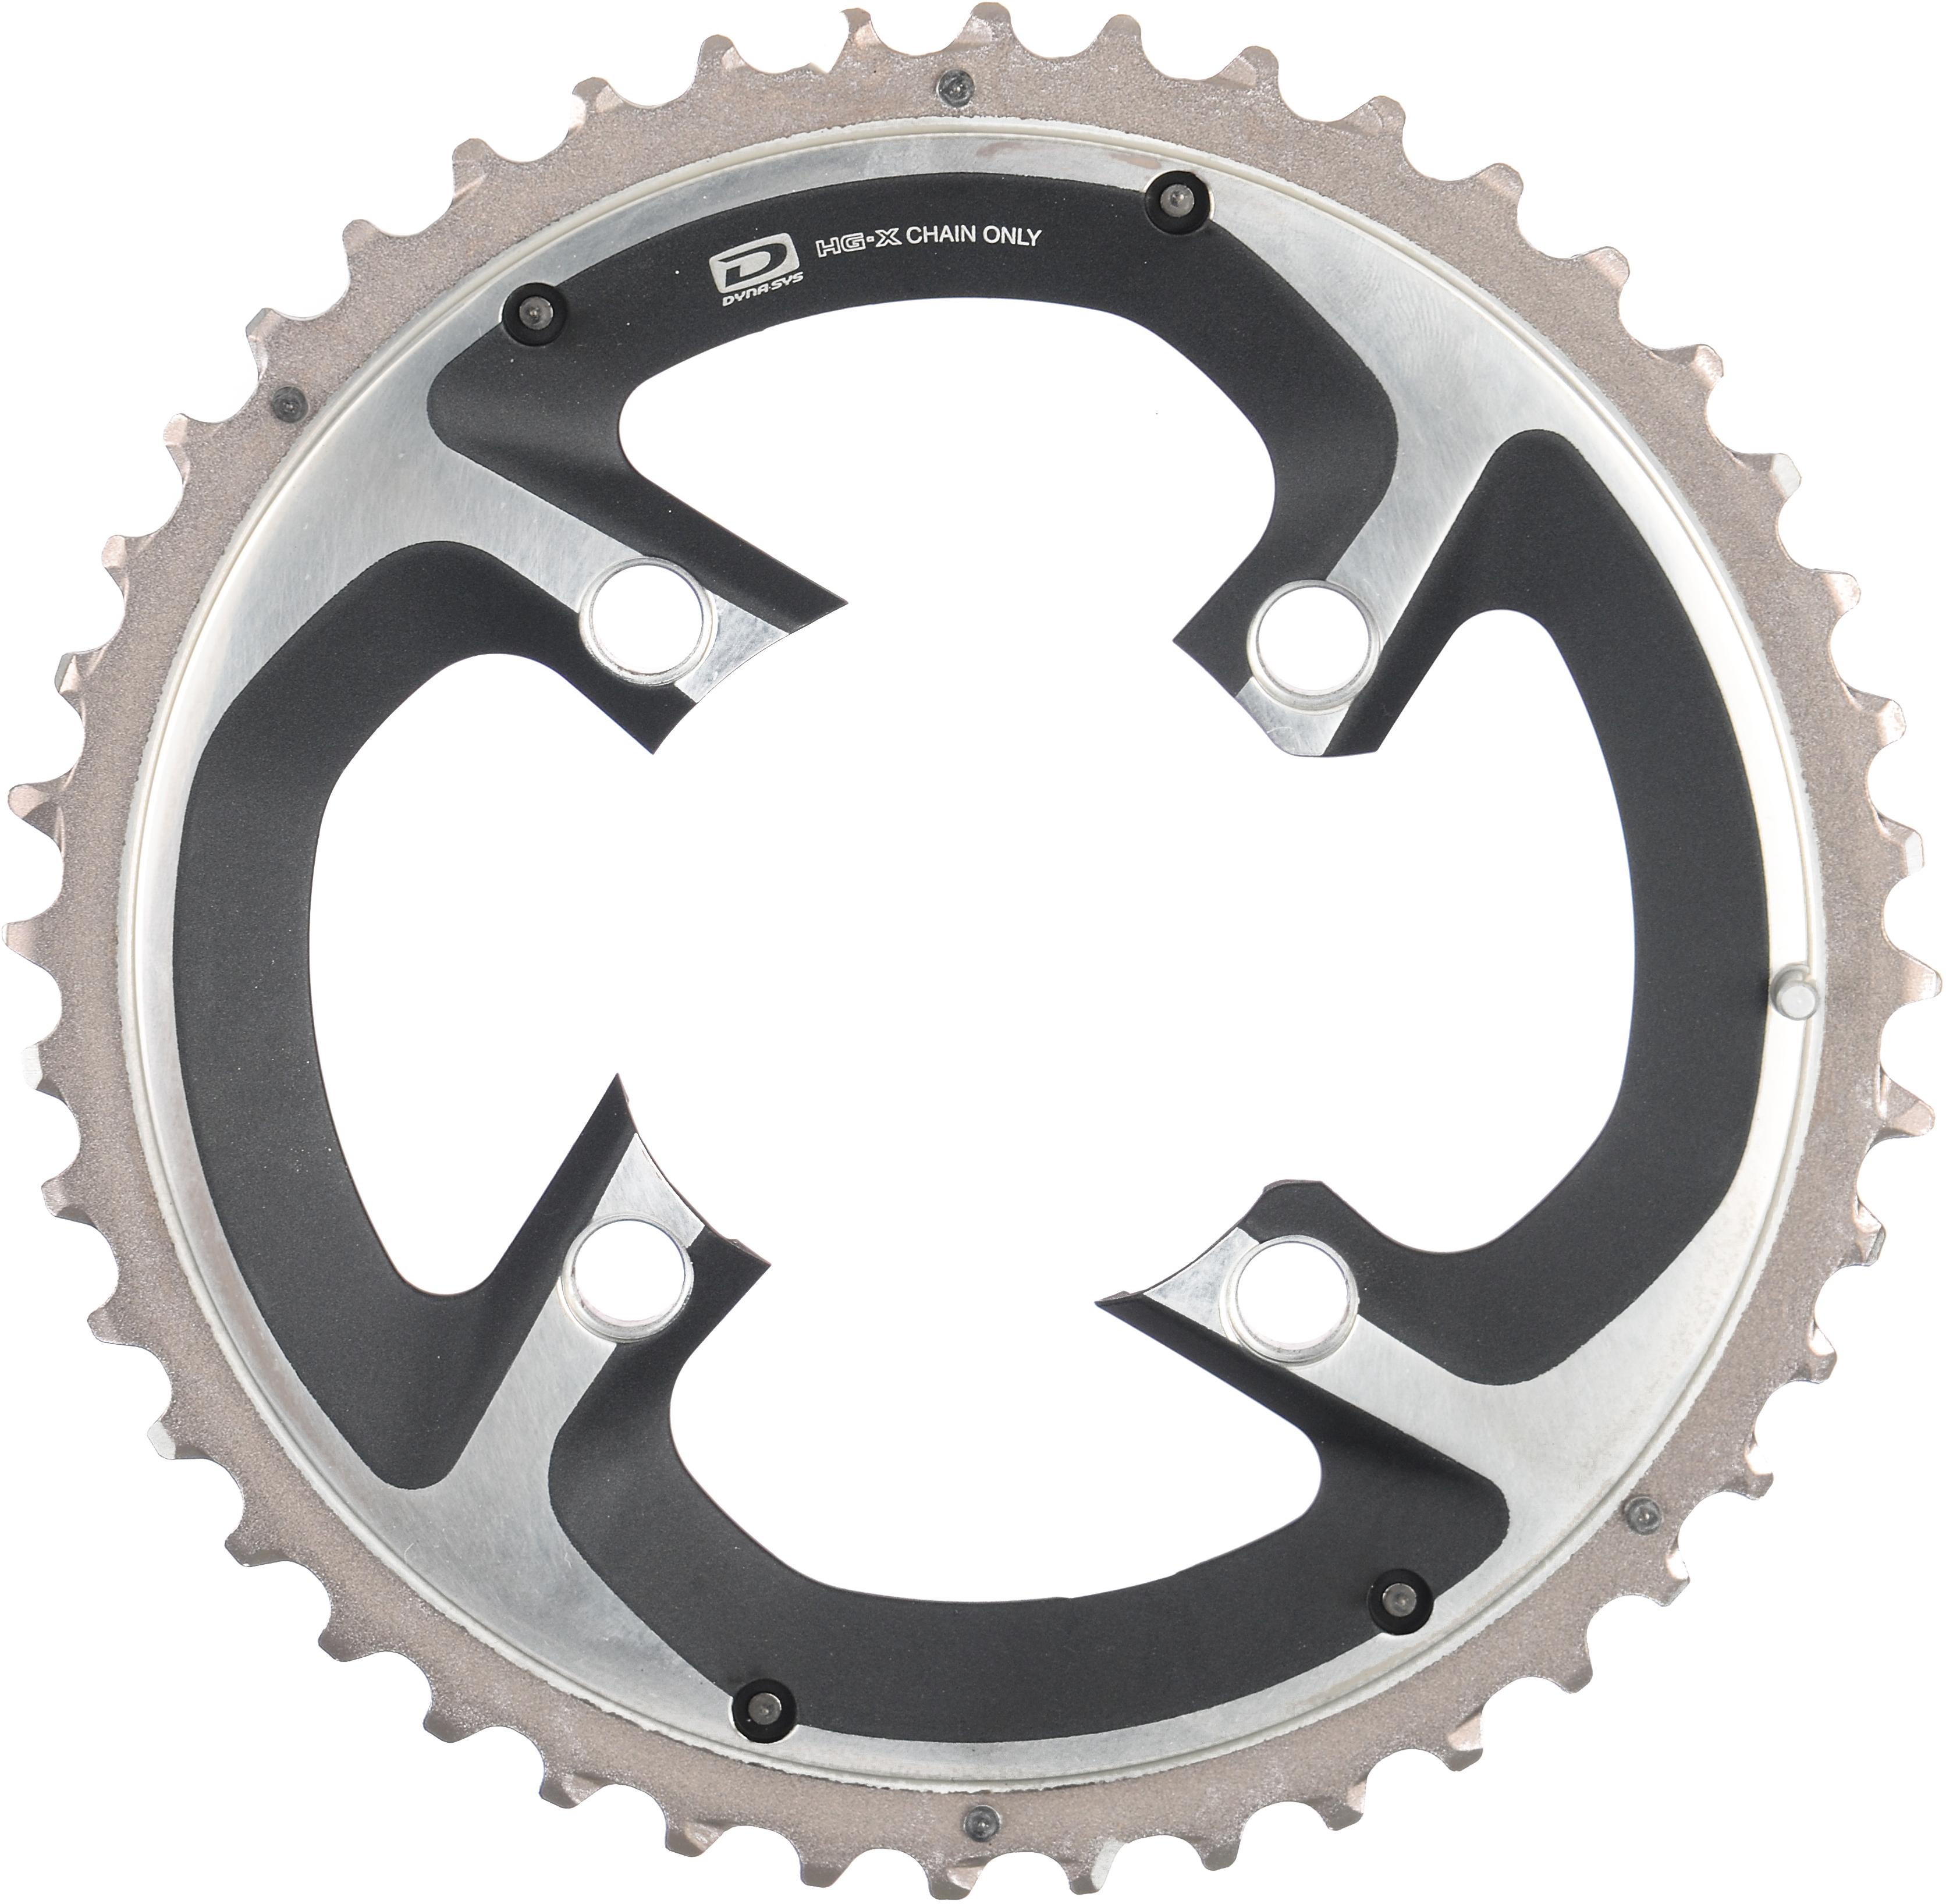 Shimano Xtr Fcm985 10 Speed Double Chainrings - Silver